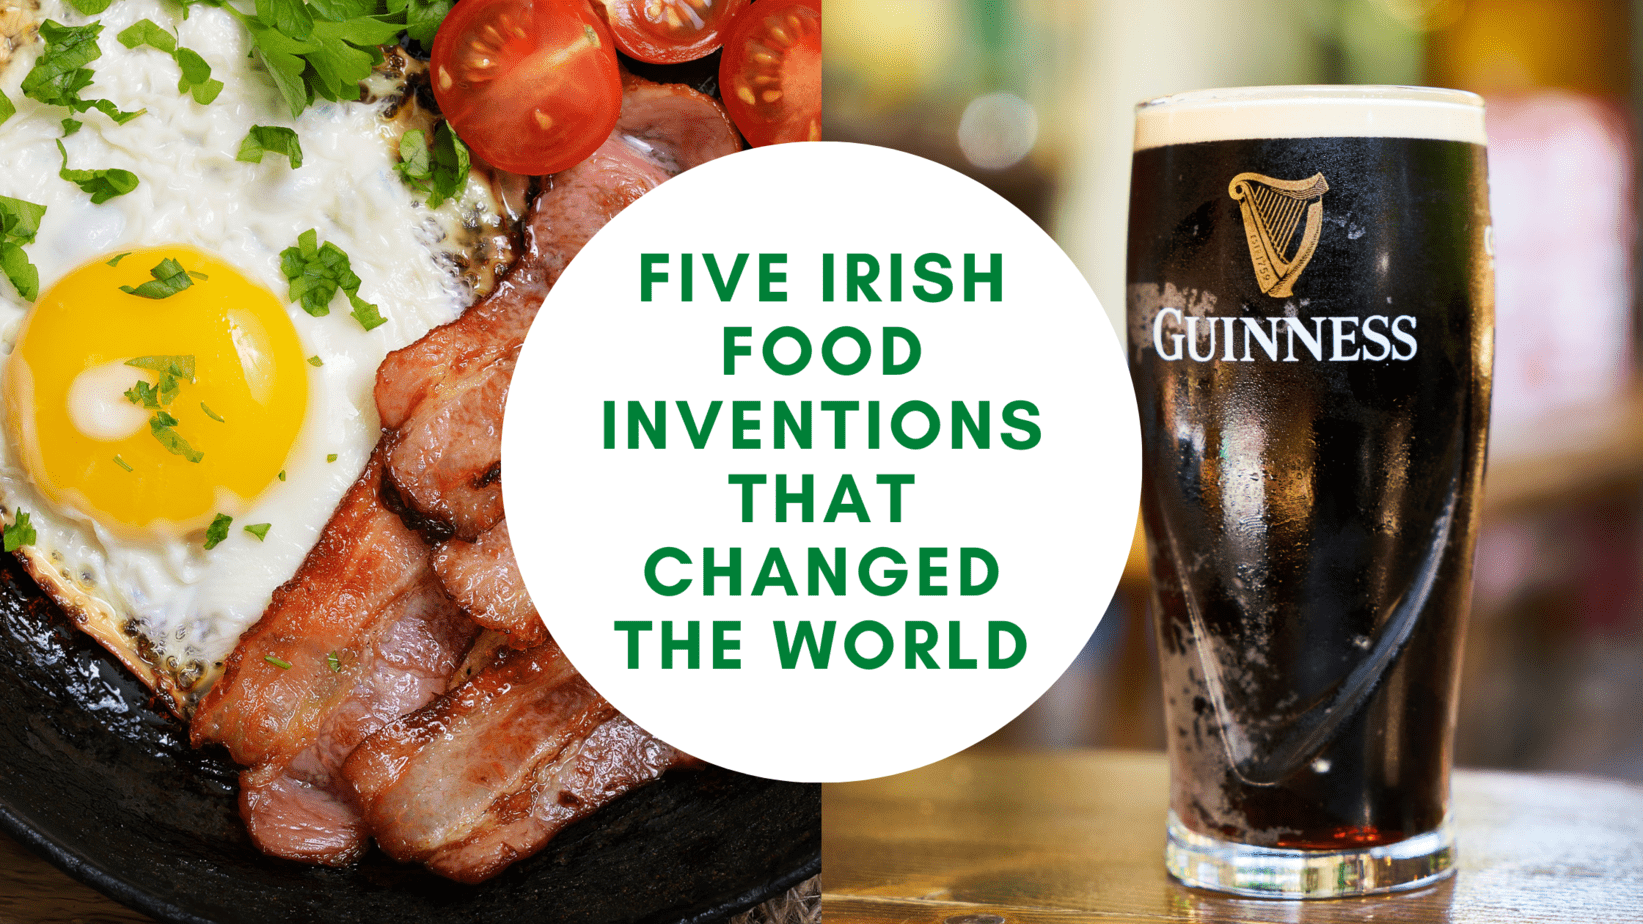 Five Irish Inventions That Changed The World part 1: Food